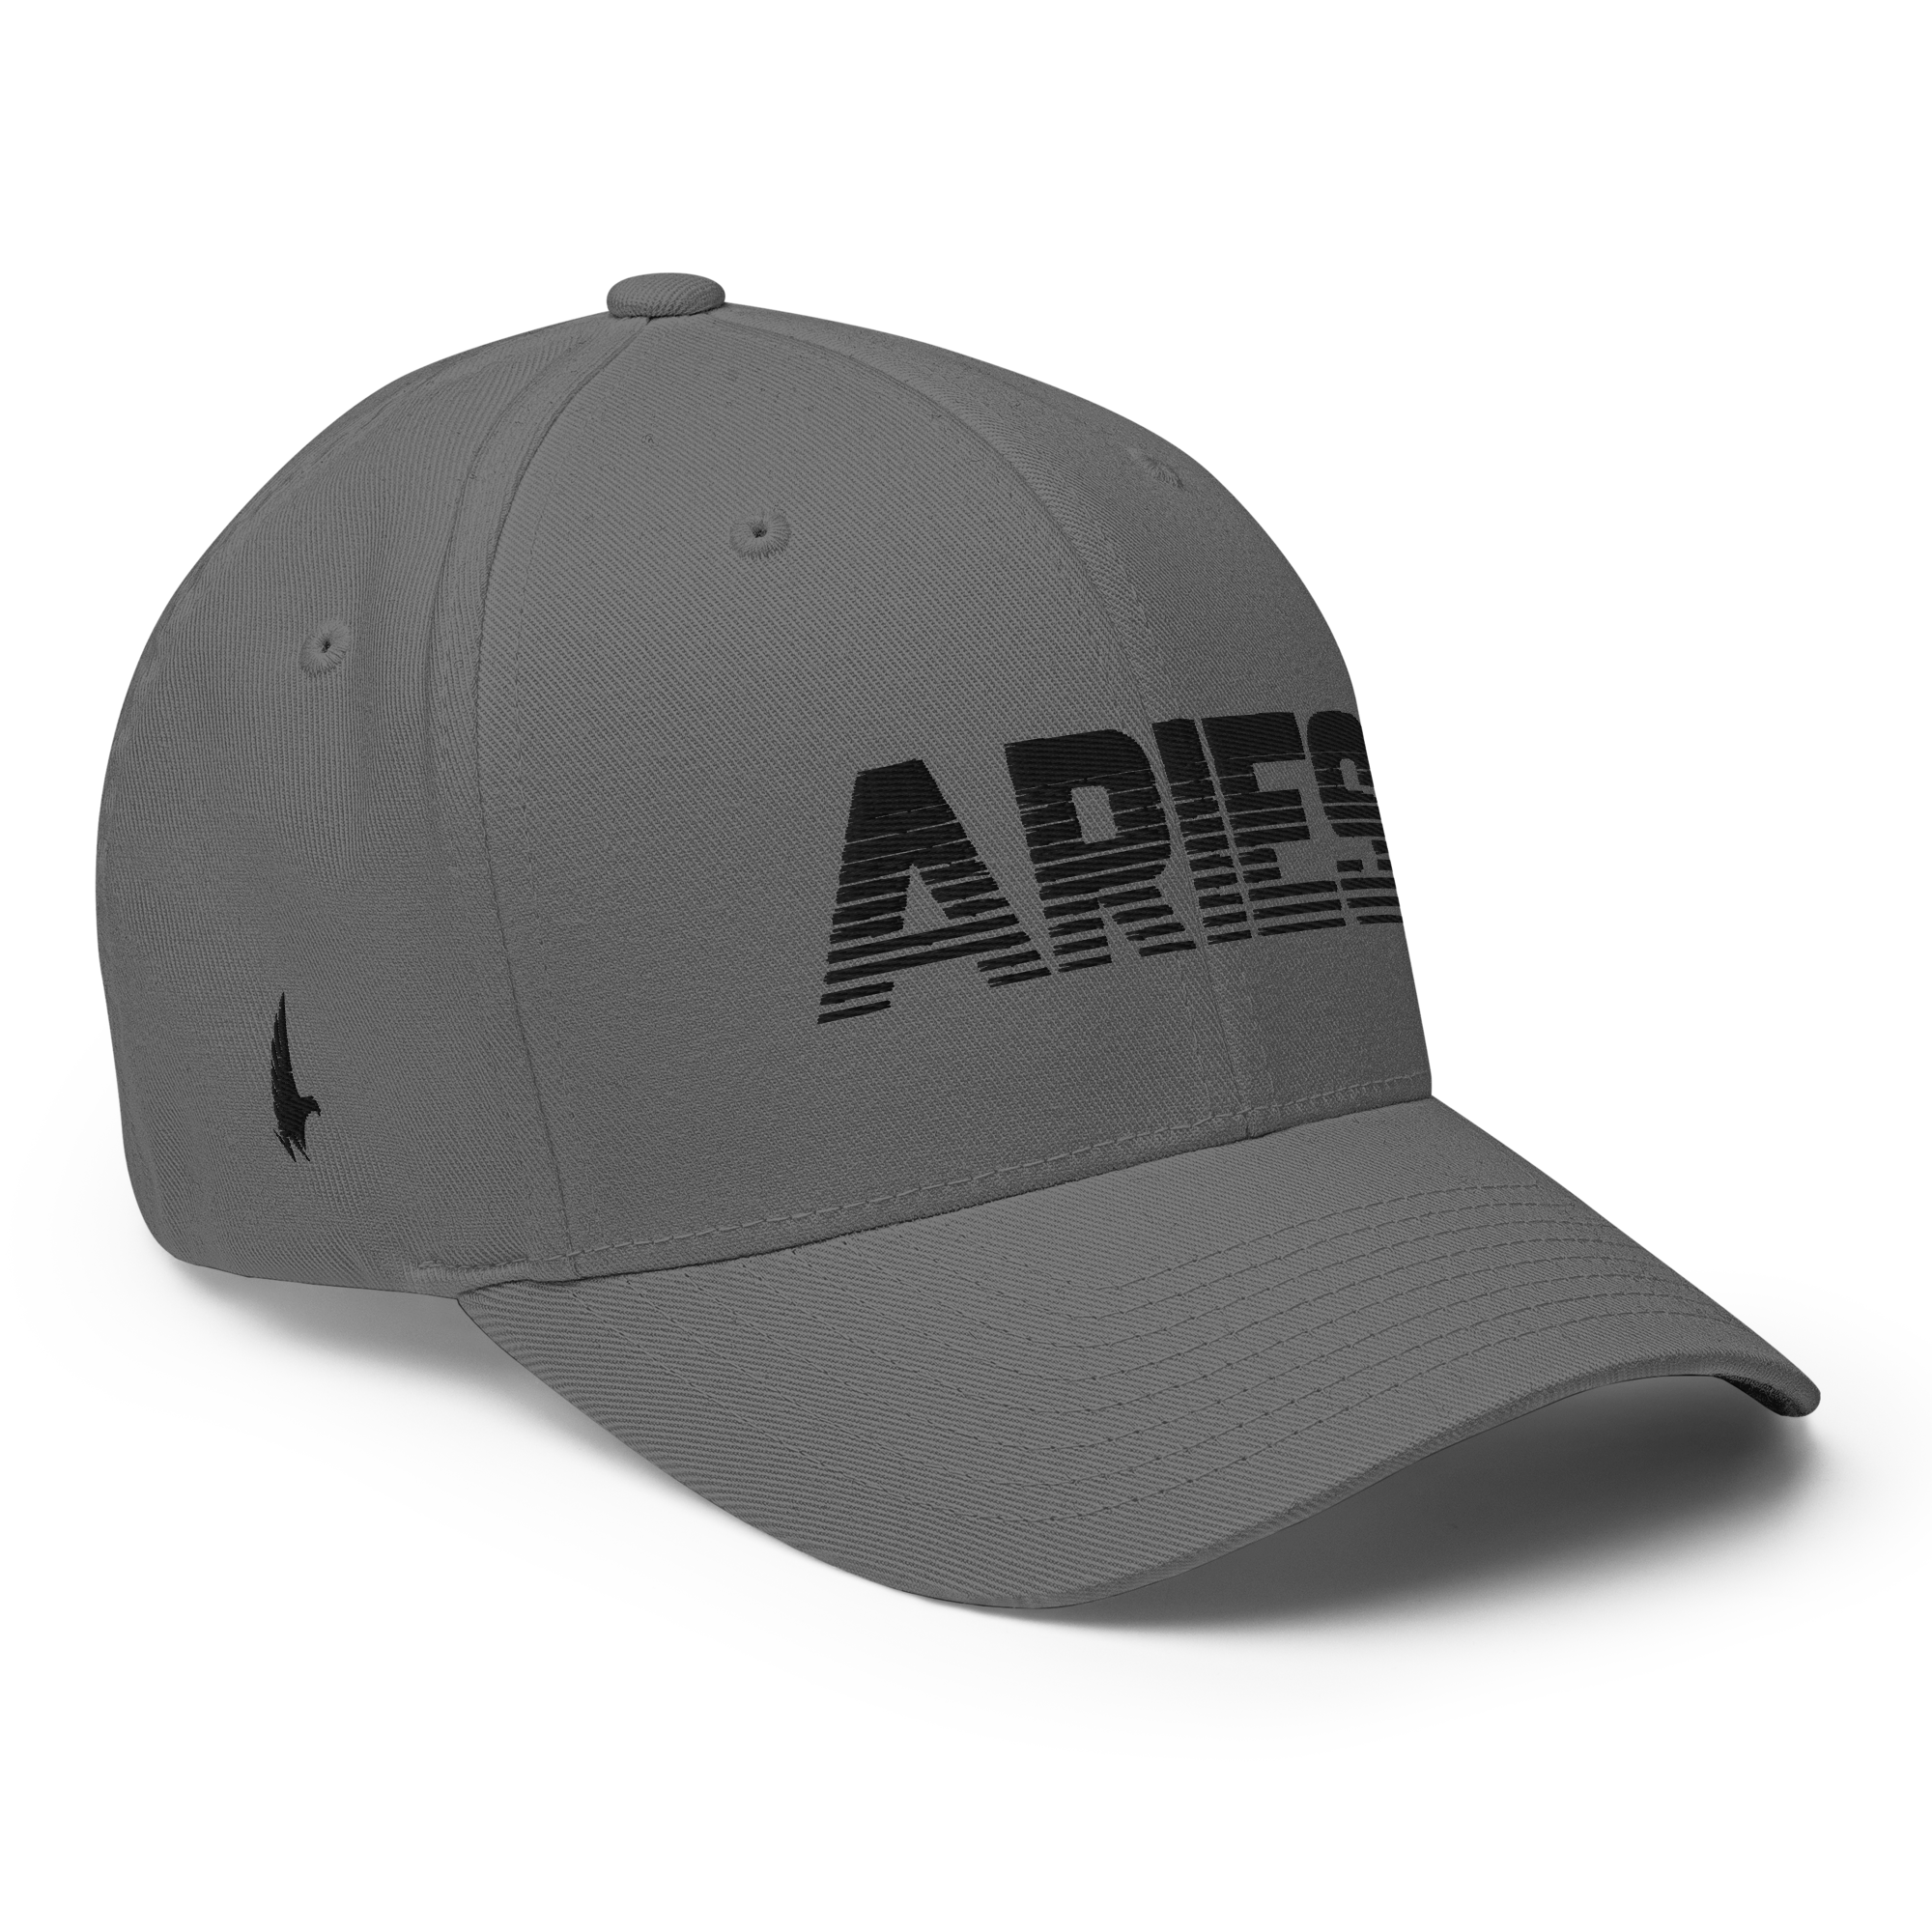 Aries Fitted Hat - Grey/Black Fitted - Loyalty Vibes